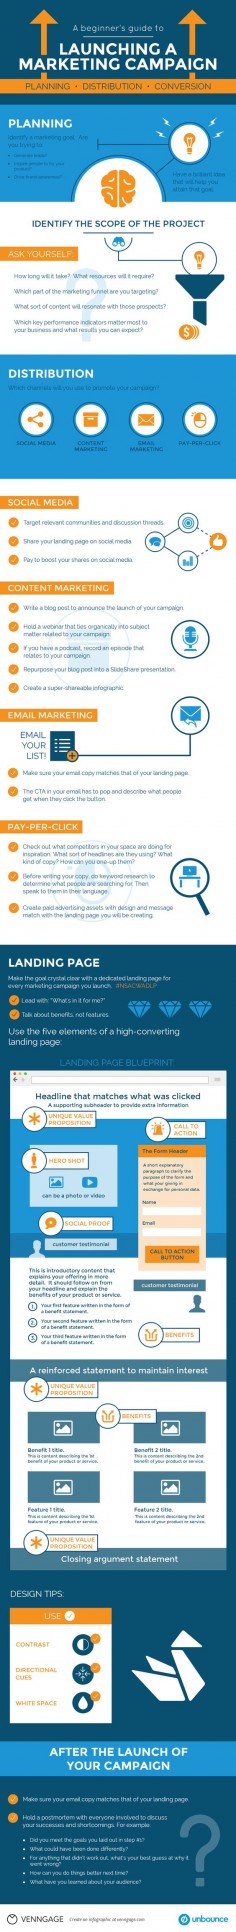 A Beginners Guide to Launching a Successful Marketing Campaign [INFOGRAPHIC]